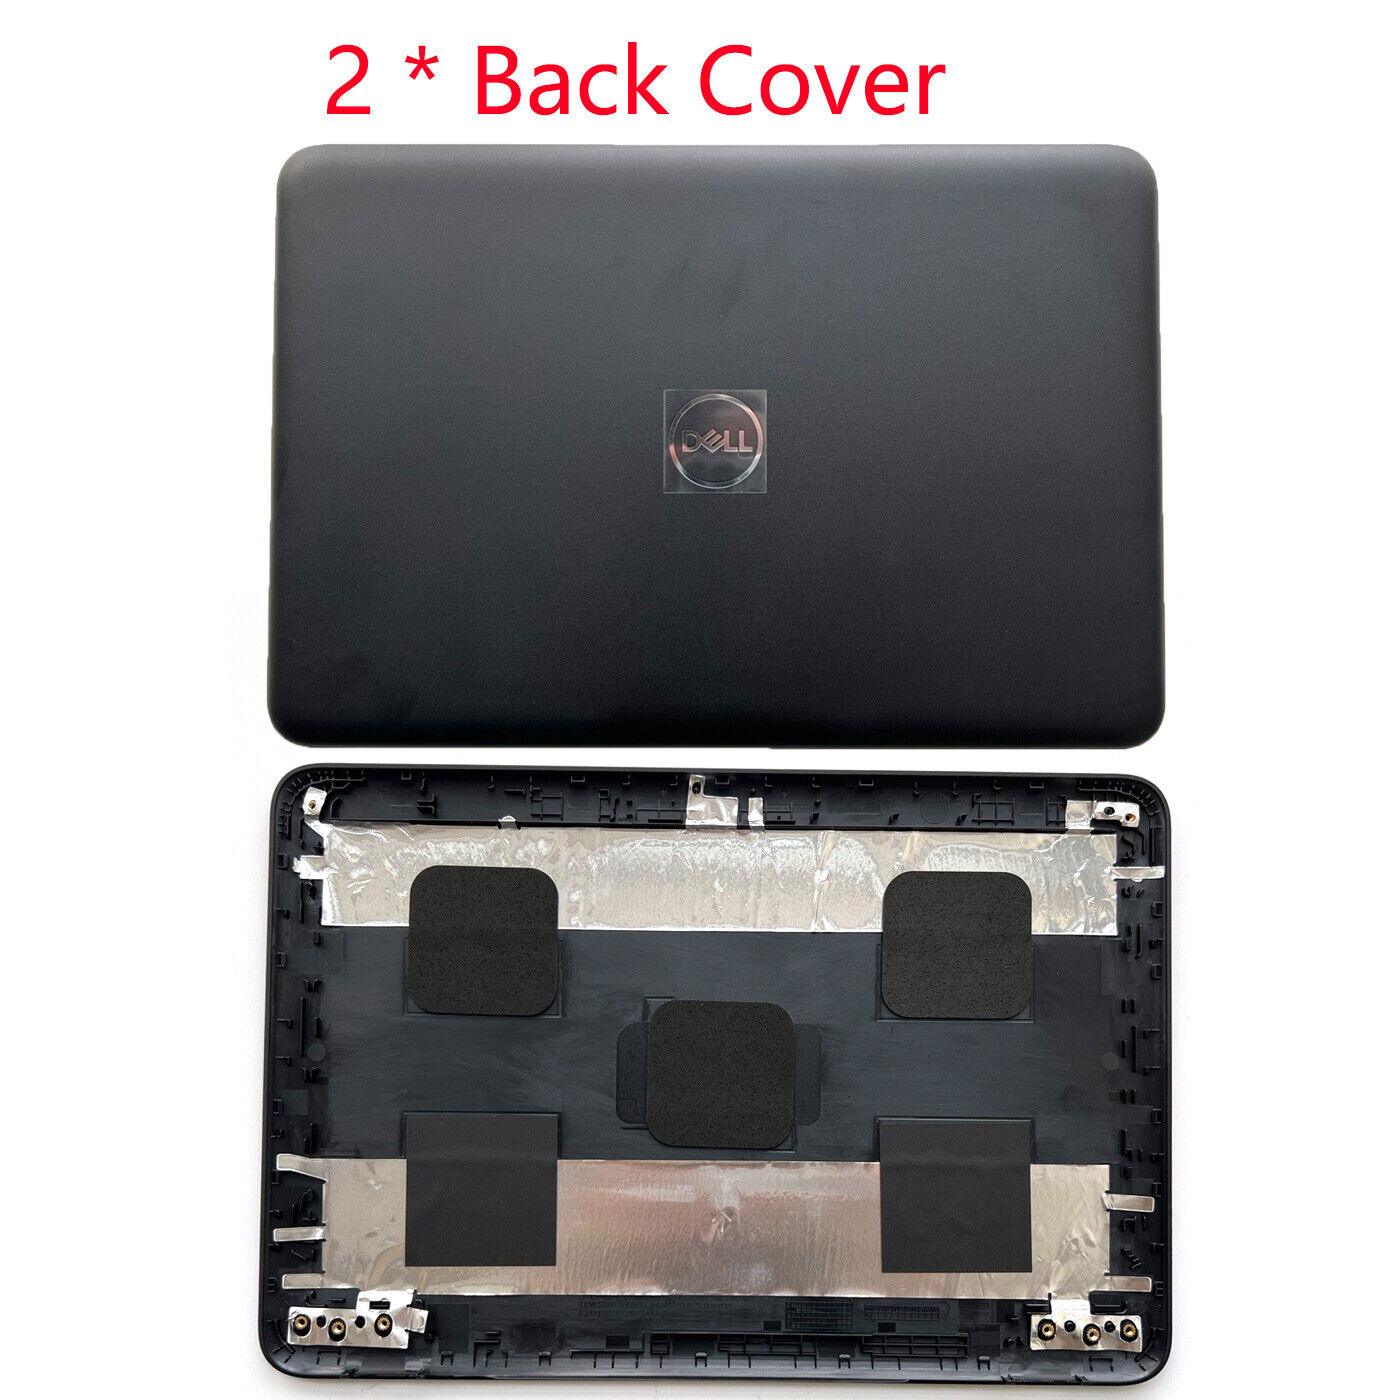 2X LCD Rear Top Lid Back Cover Black For Dell latitude 11 3180 00H061 0H061